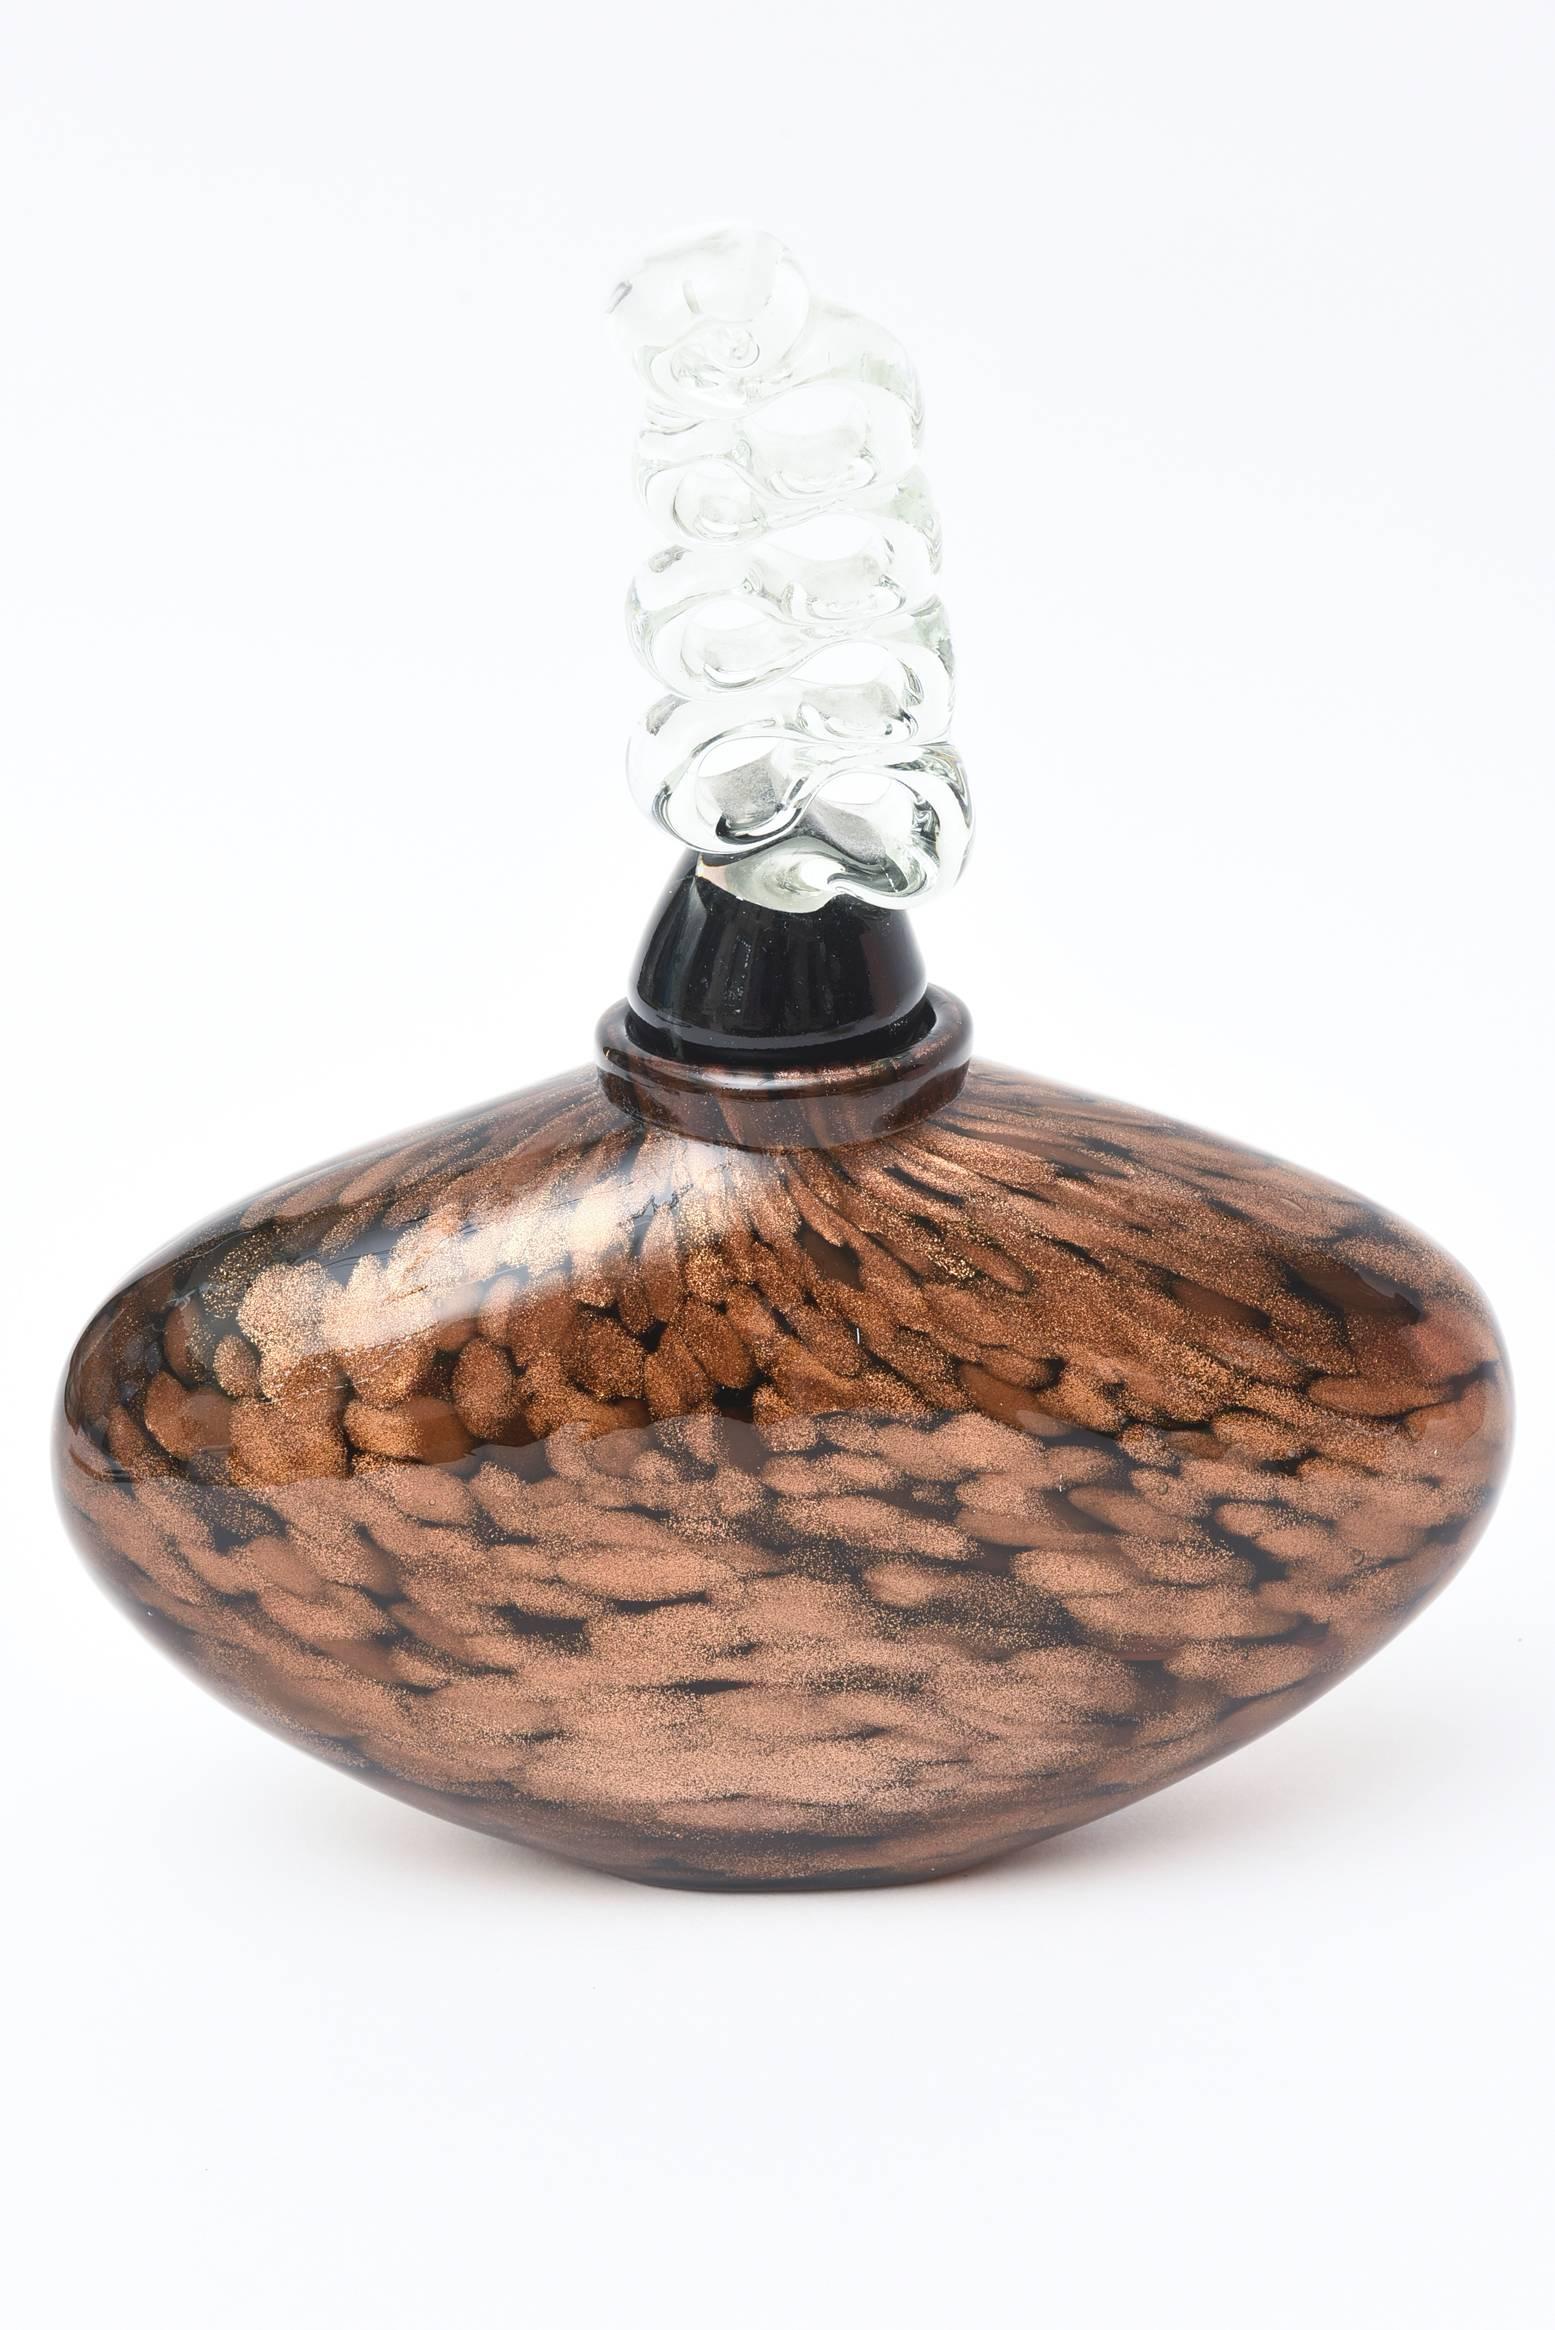 This stunning abstract design of this Italian monumental Murano glass oval decanter, perfume bottle or glass object has a fabulous sculptural original dramatic stopper. The base of the stopper is black glass with a twisted and sculptural clear glass